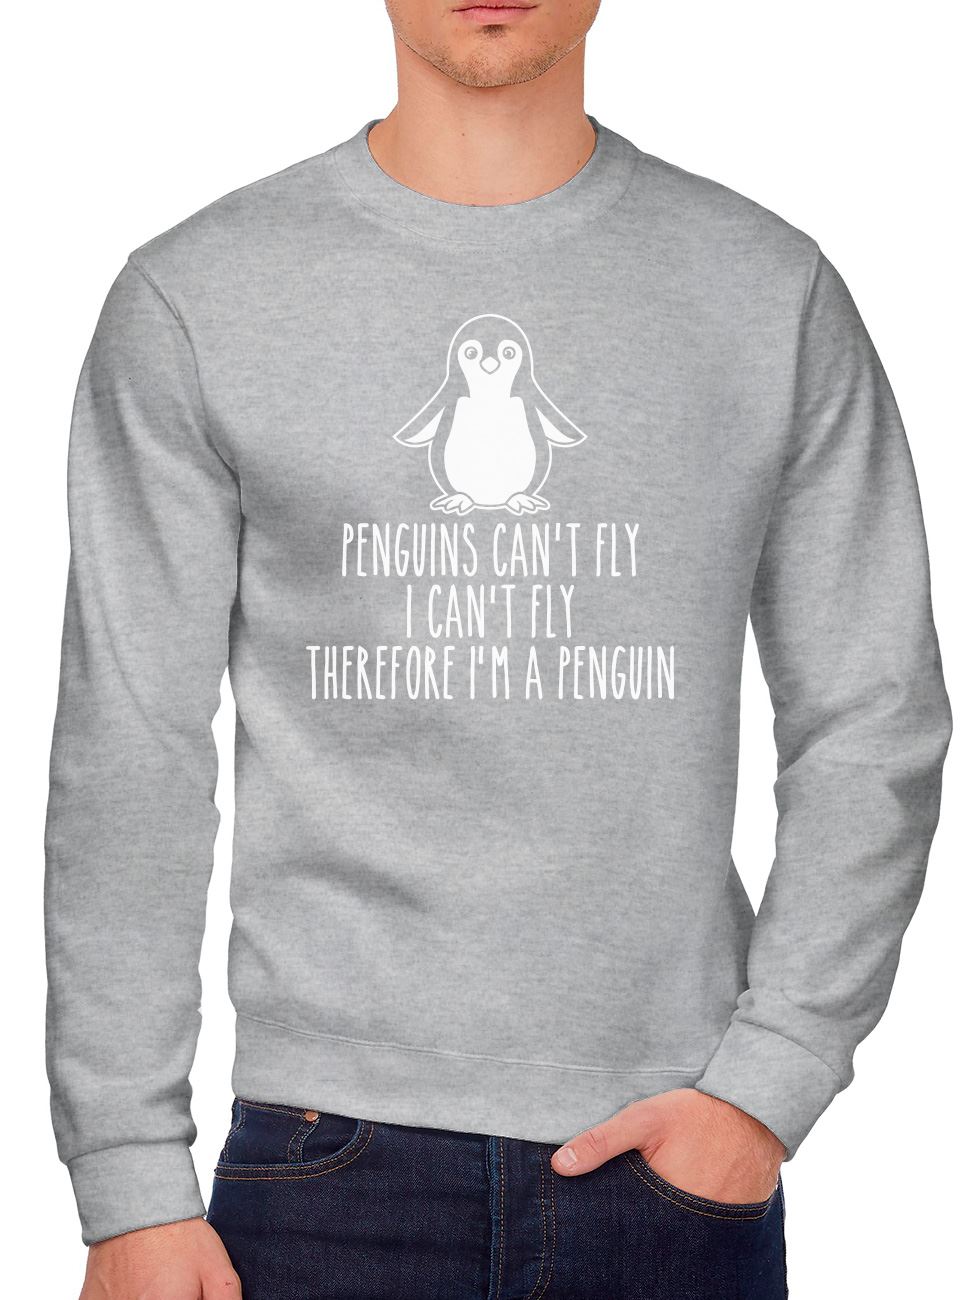 Penguins Can't Fly, I Can't Fly, Therefore I Am a Penguin - Youth & Mens Sweatshirt